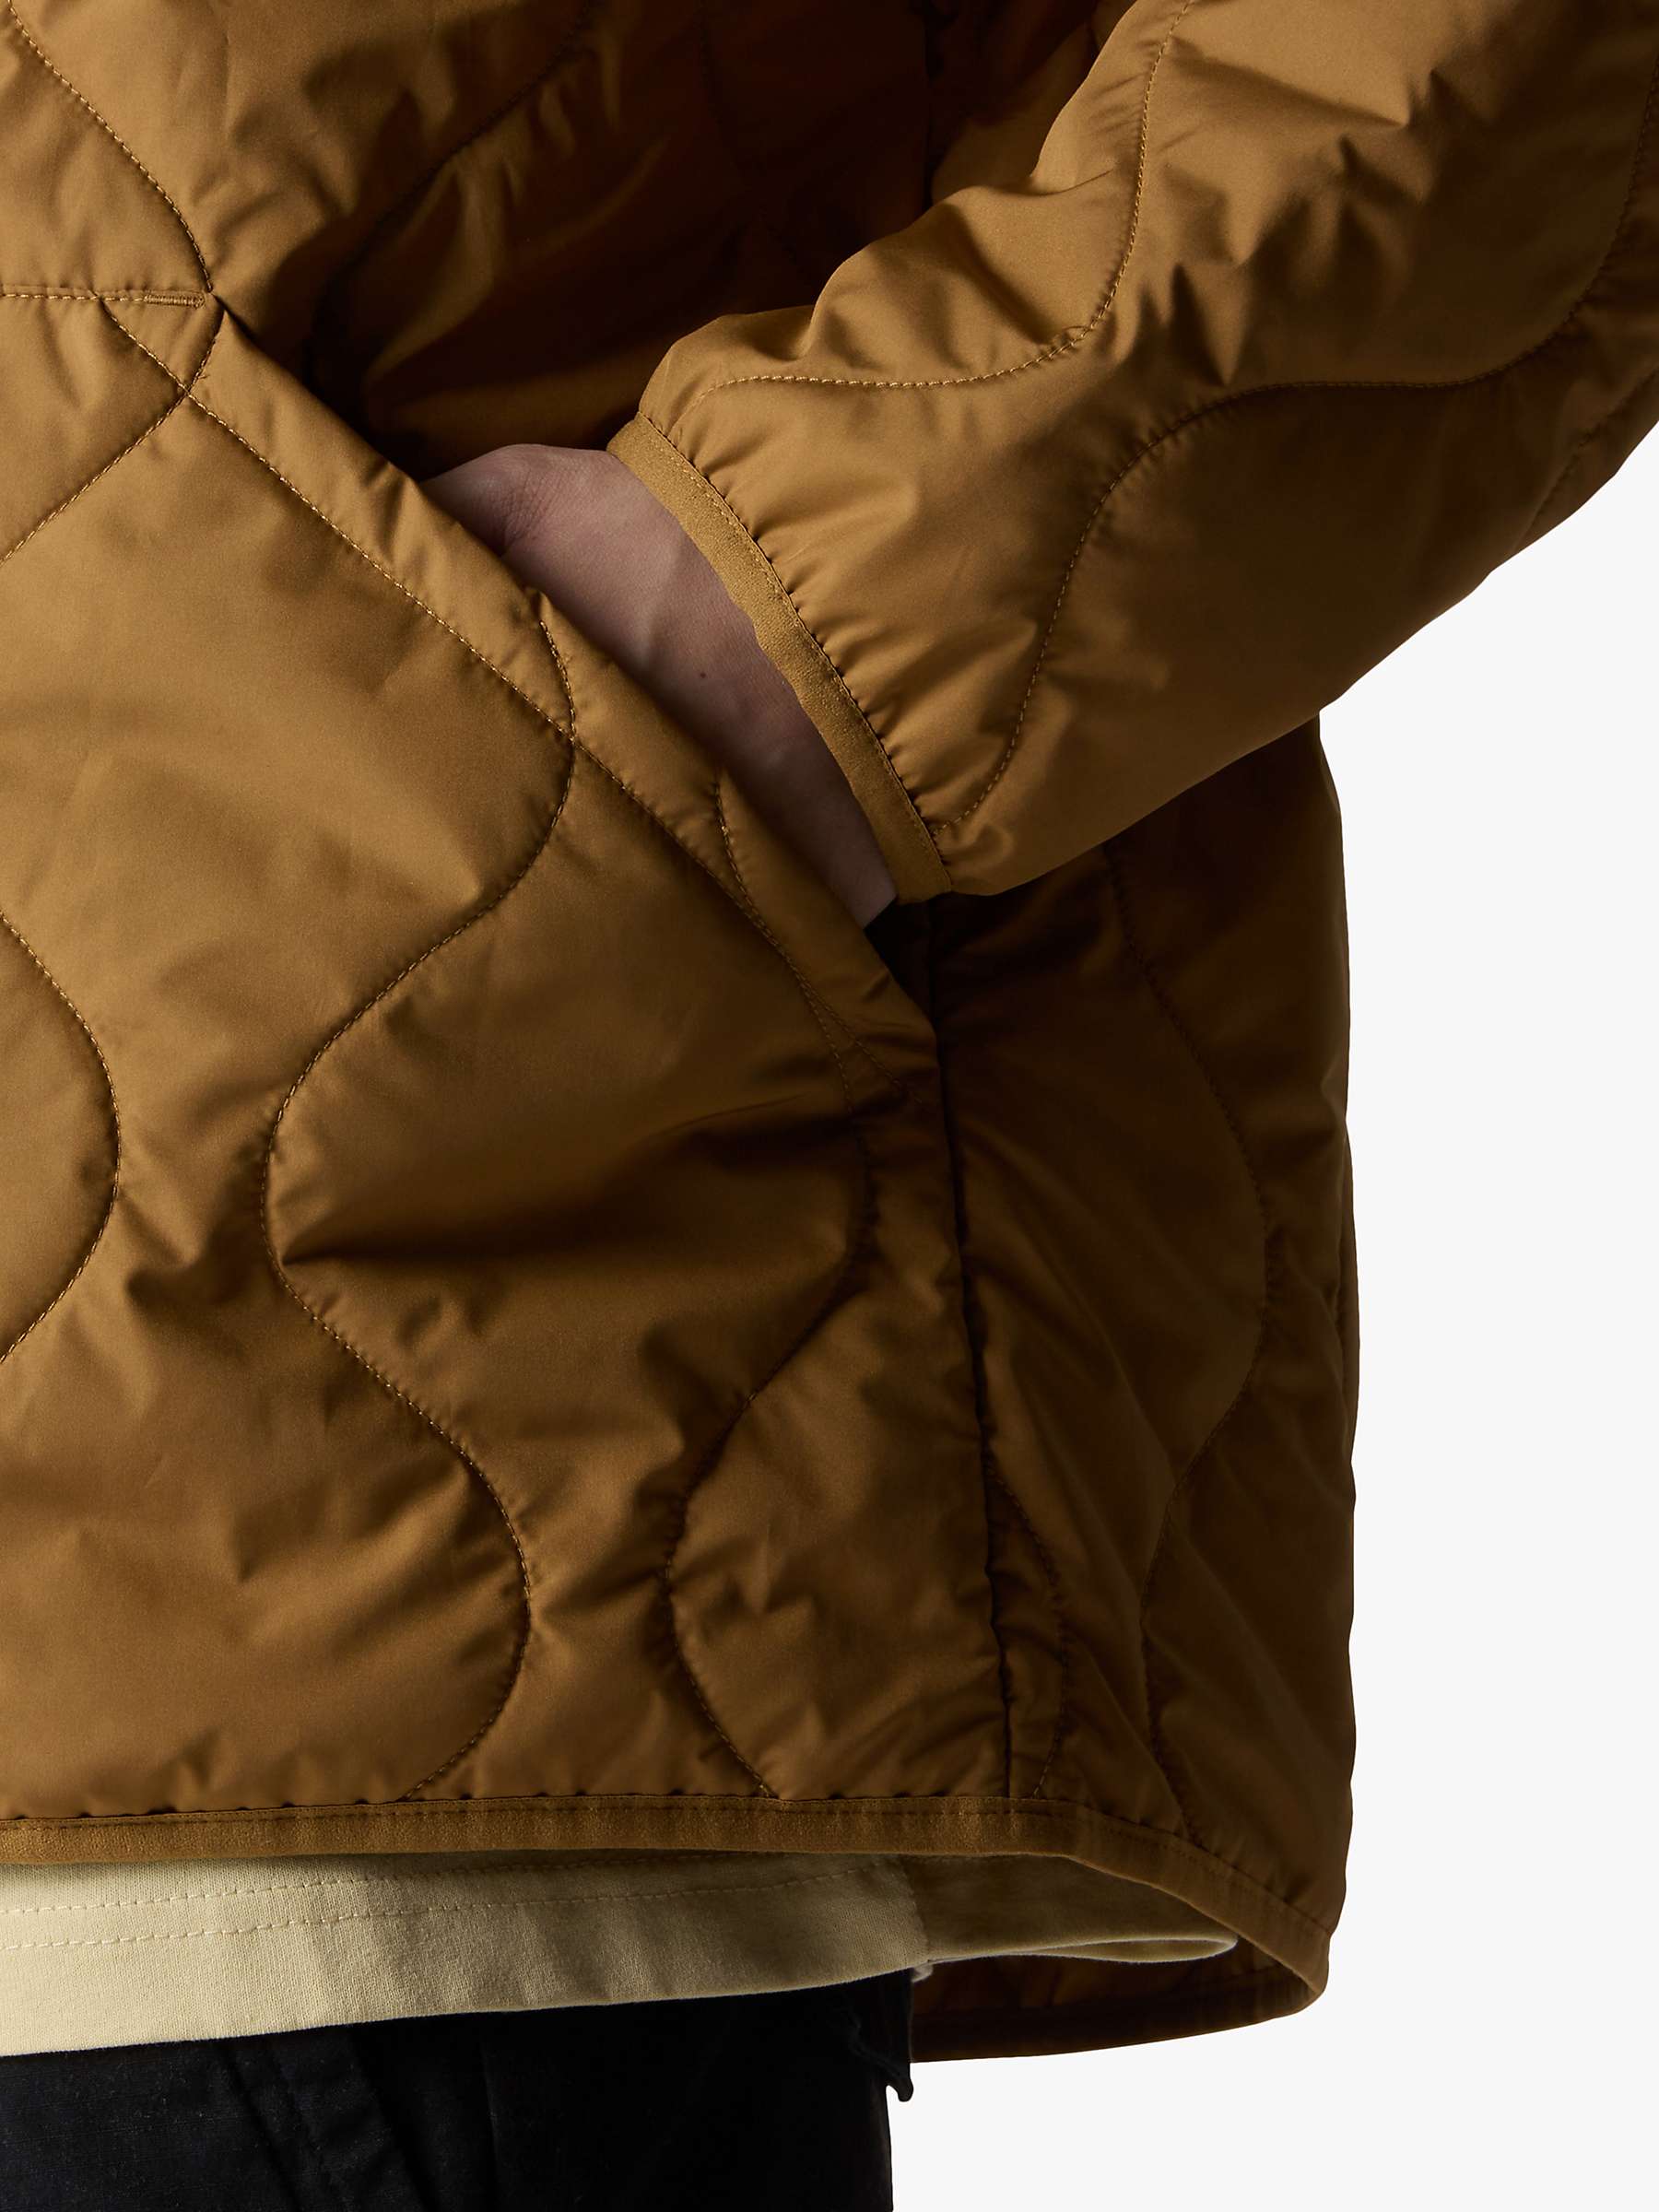 Buy The North Face Ampato Quilted Jacket, Brown Online at johnlewis.com